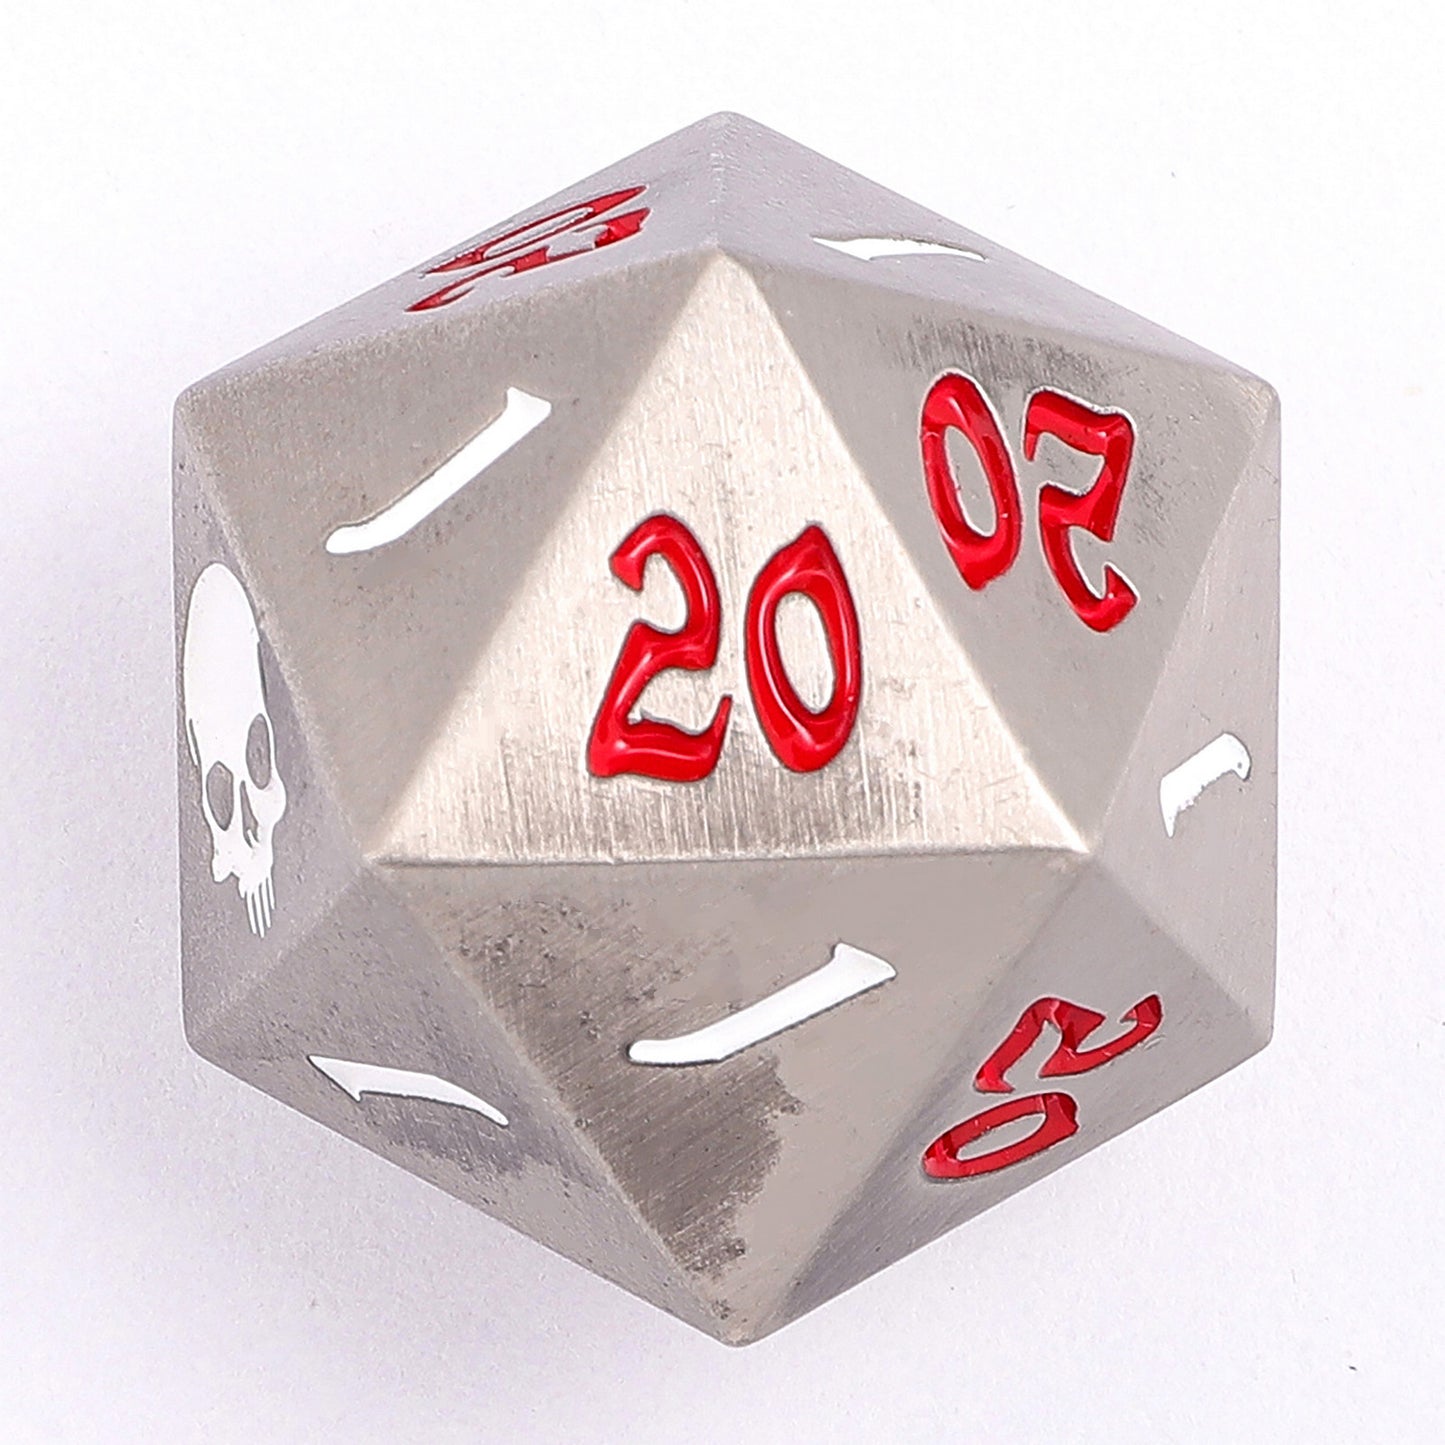 25mm Solid Metal Single D20 The Critical Dice -Ancient Silver